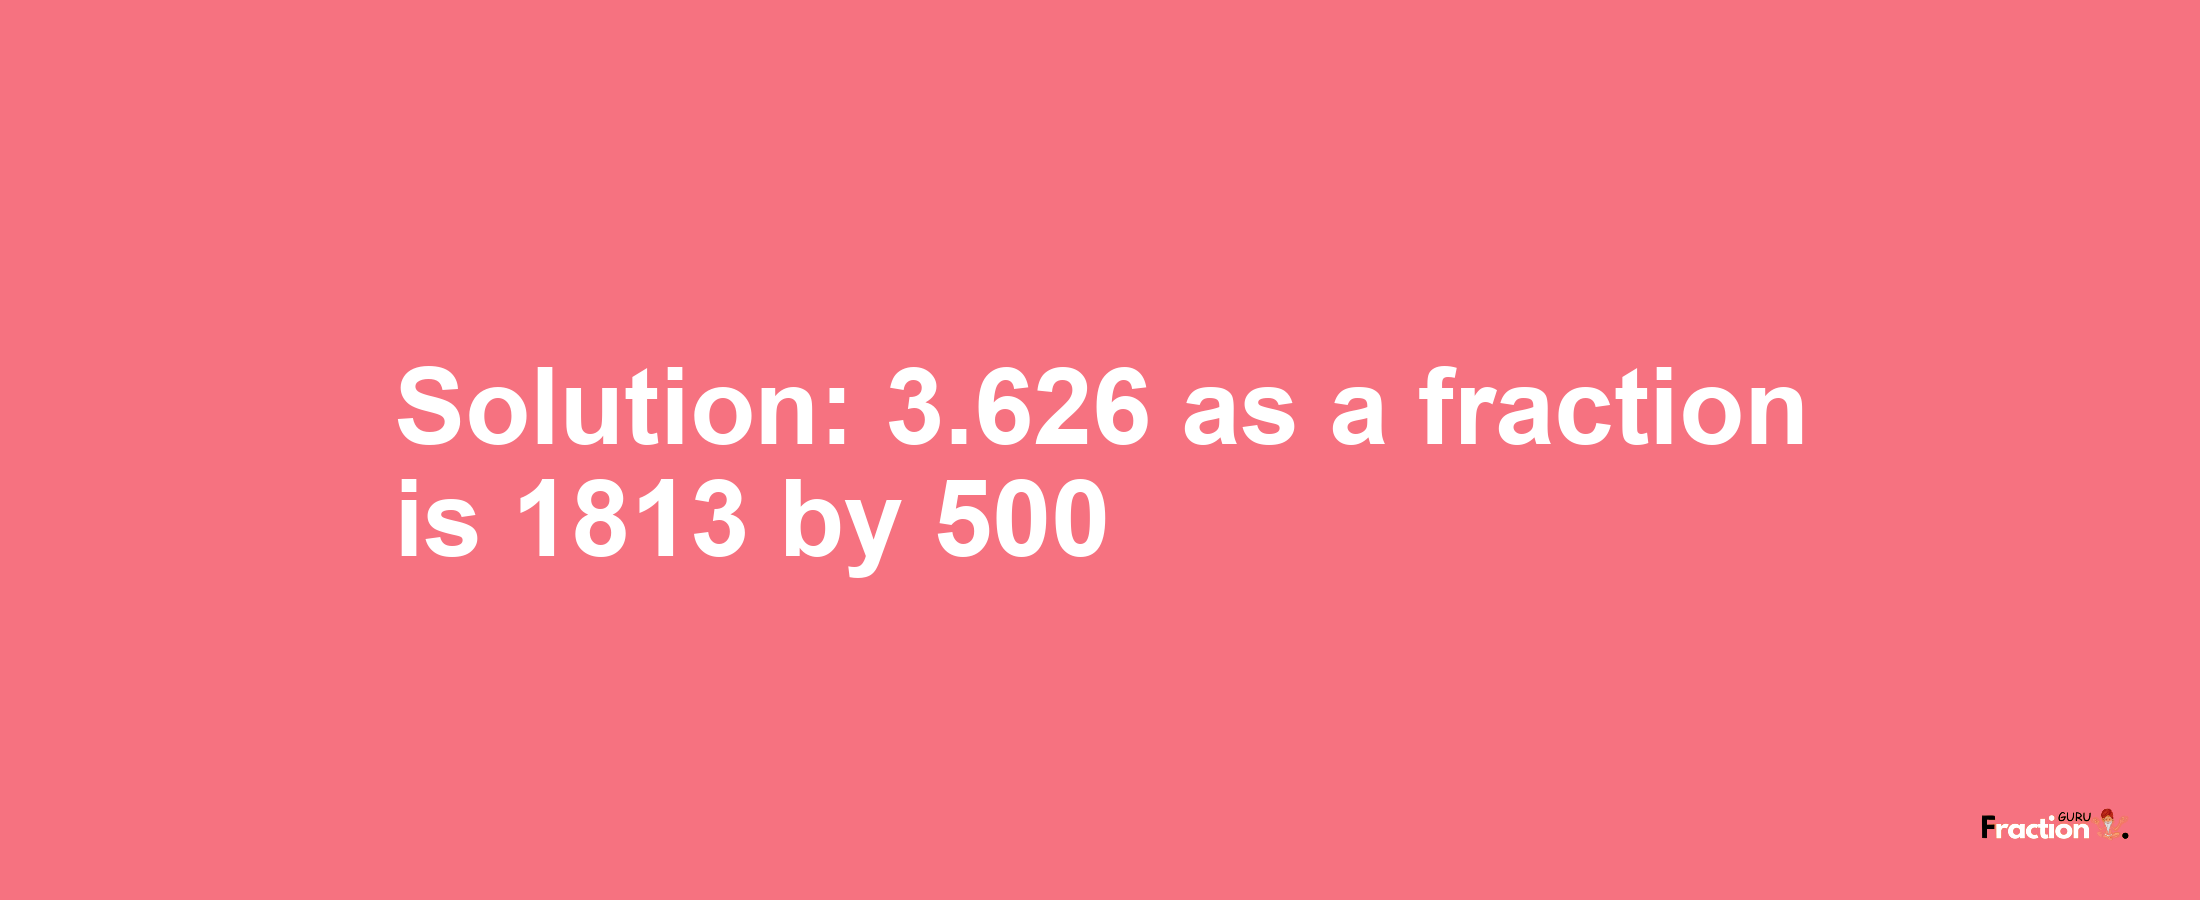 Solution:3.626 as a fraction is 1813/500